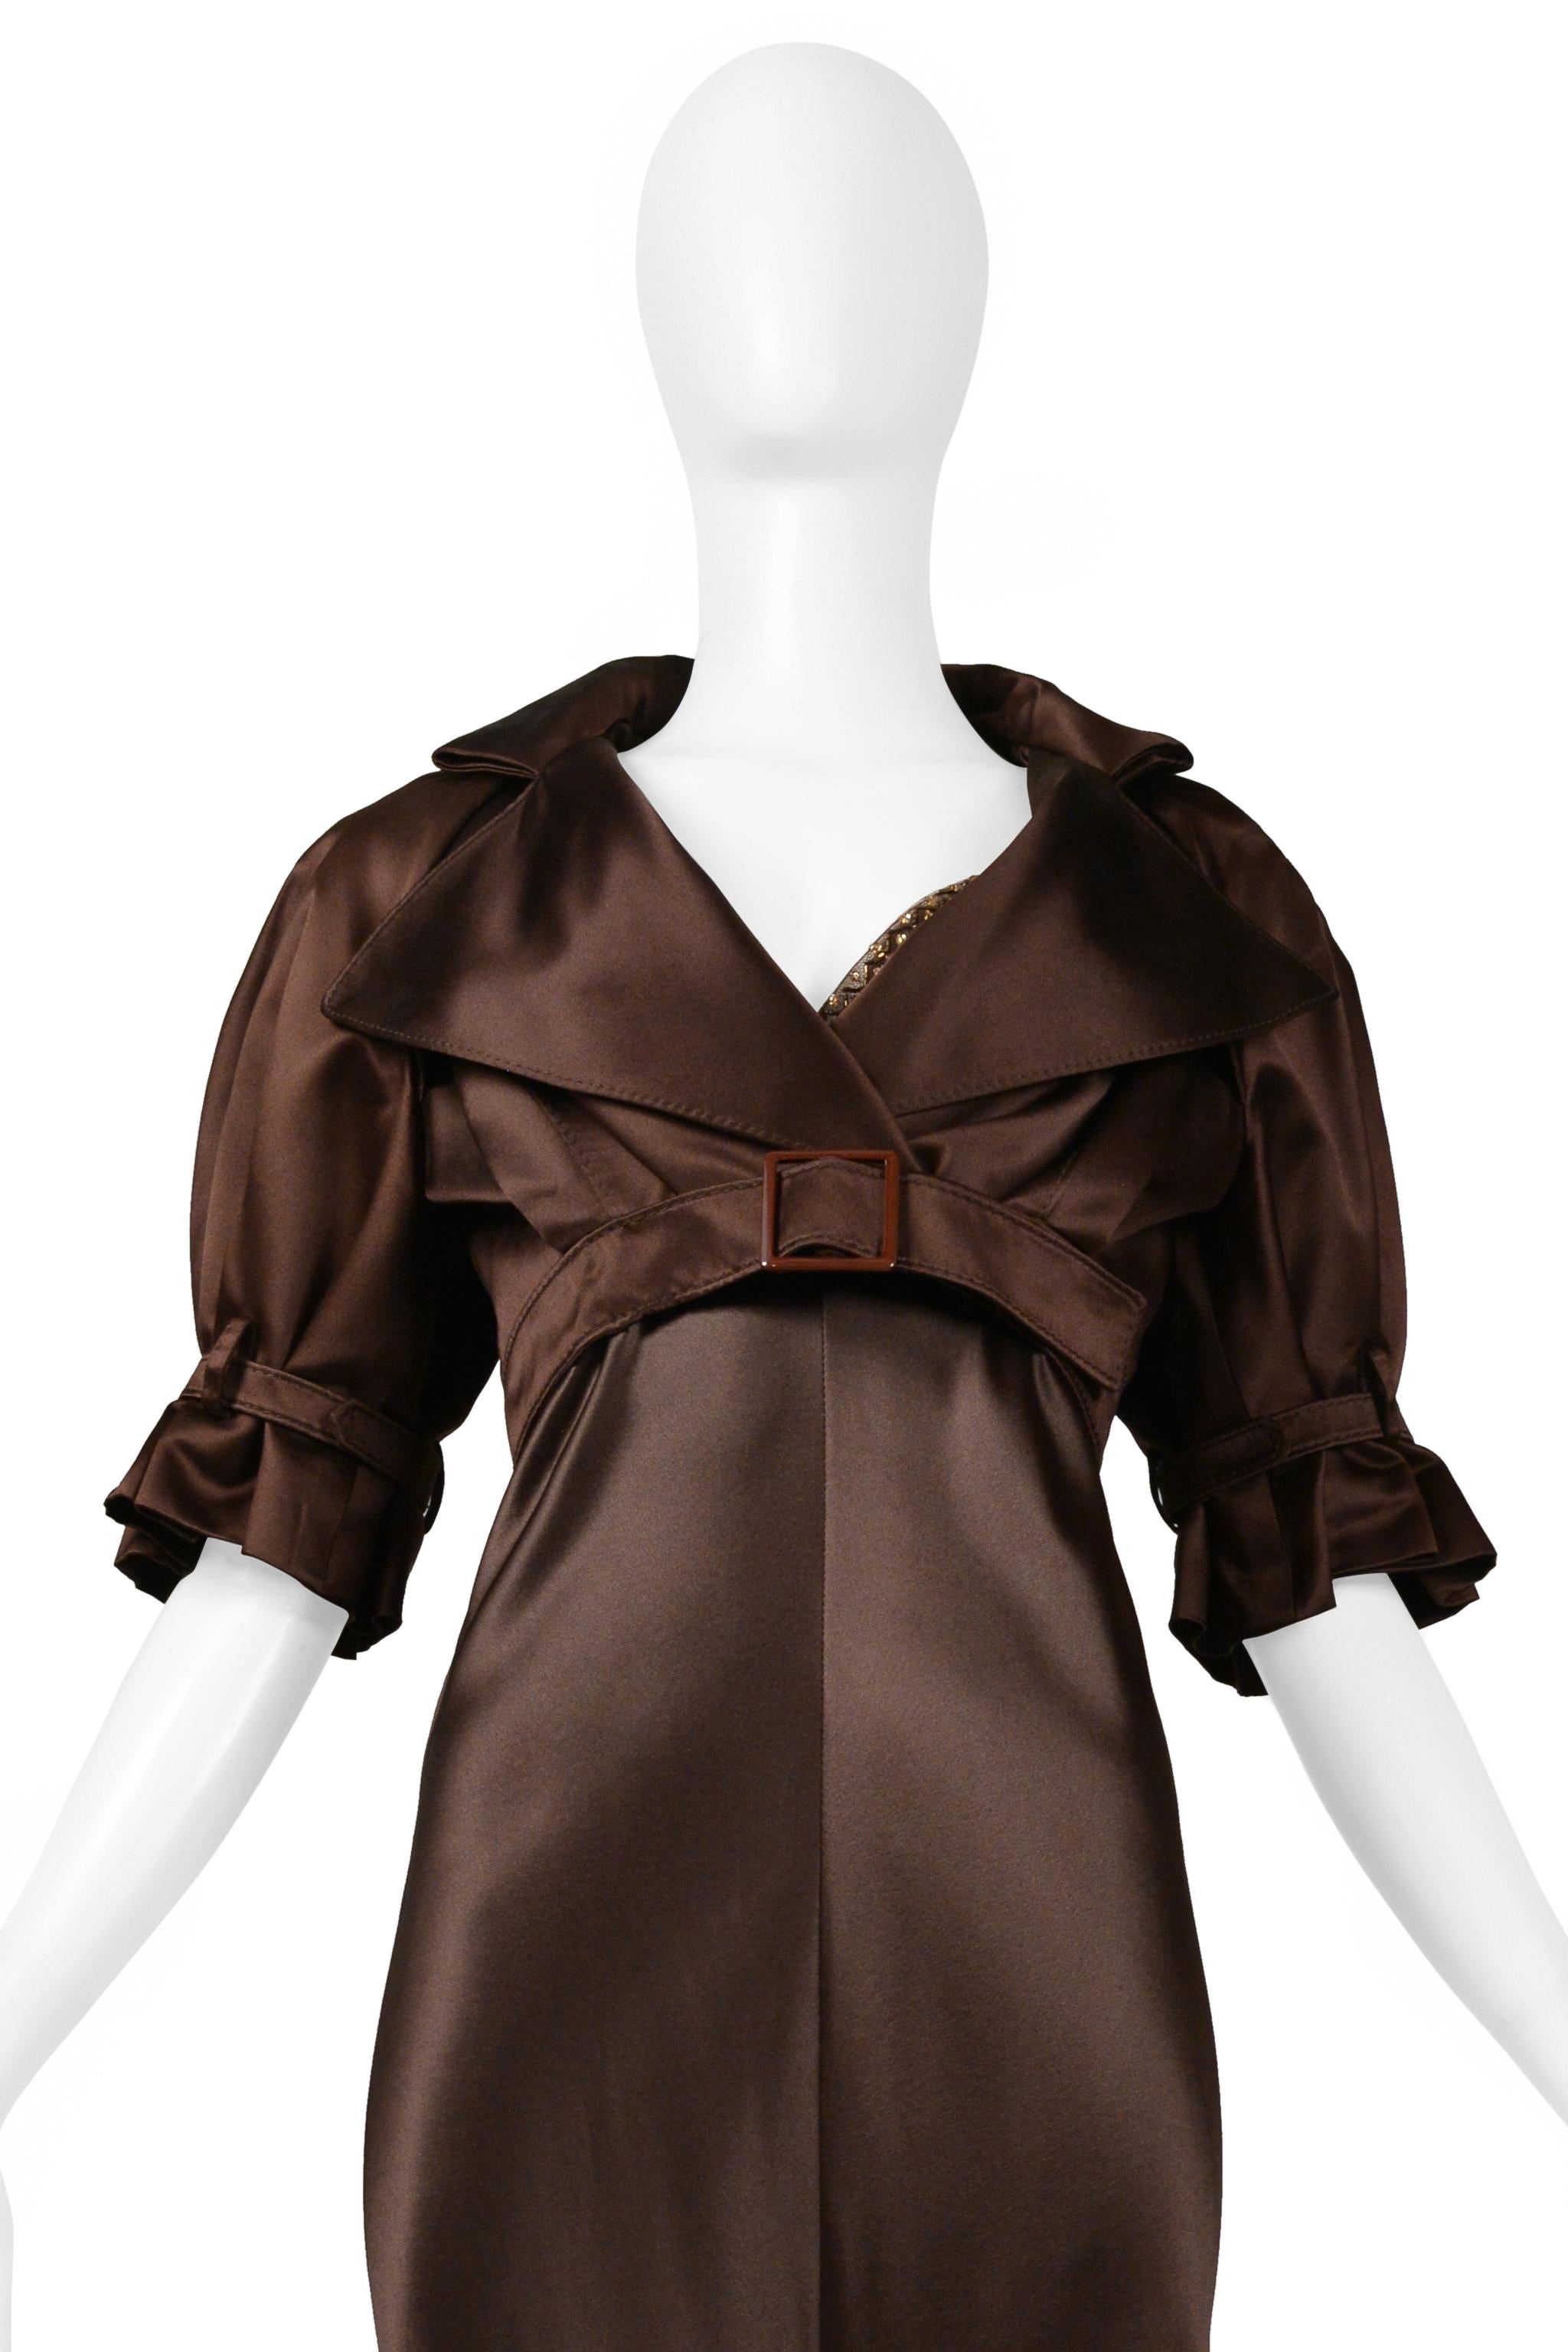 Valentino Brown Silk Evening Gown With Jacket AW 2006-07 For Sale 4